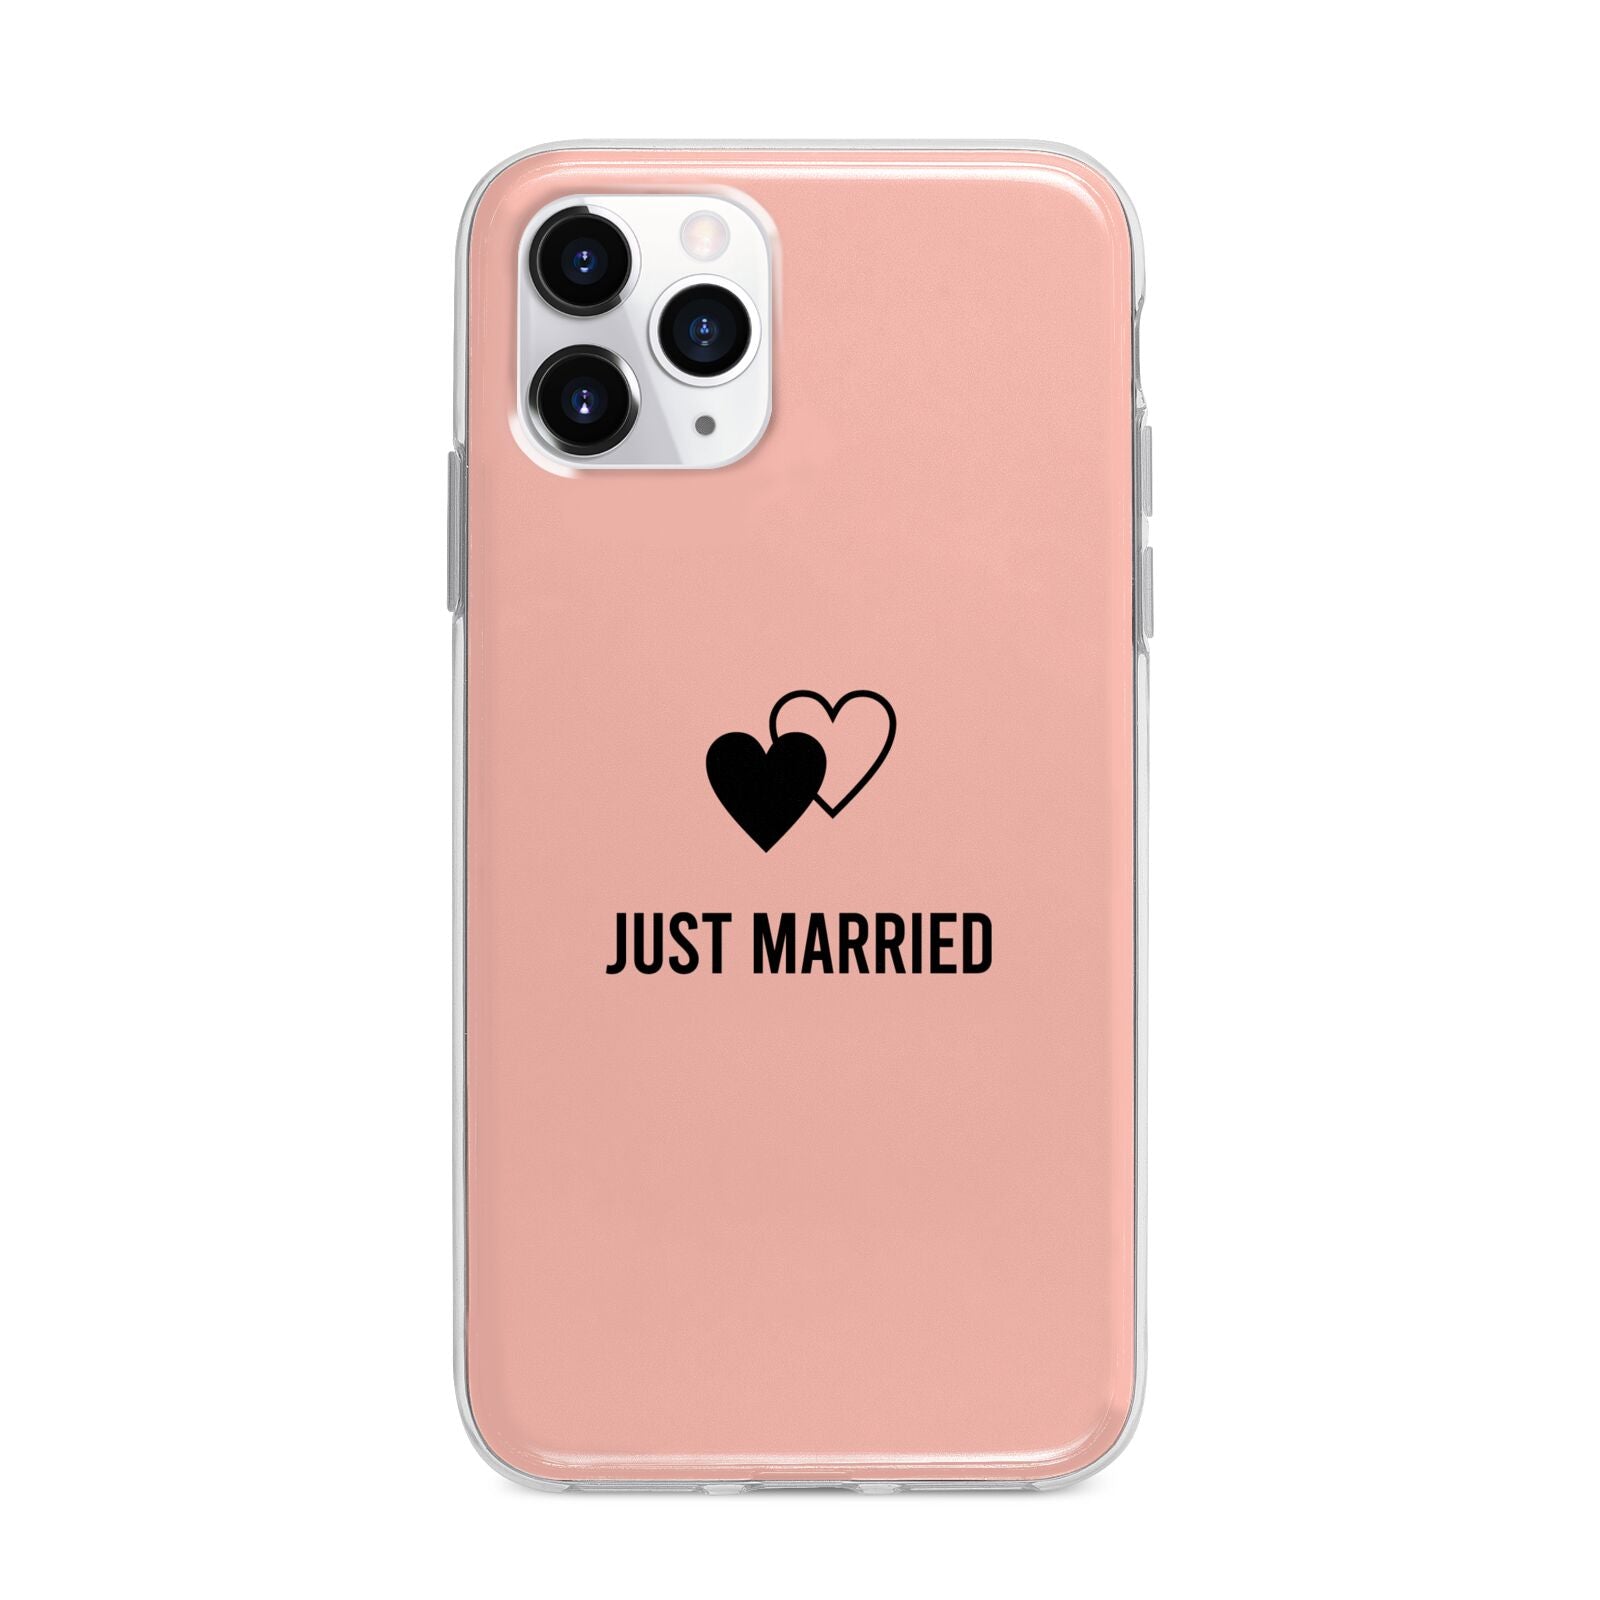 Just Married Apple iPhone 11 Pro Max in Silver with Bumper Case